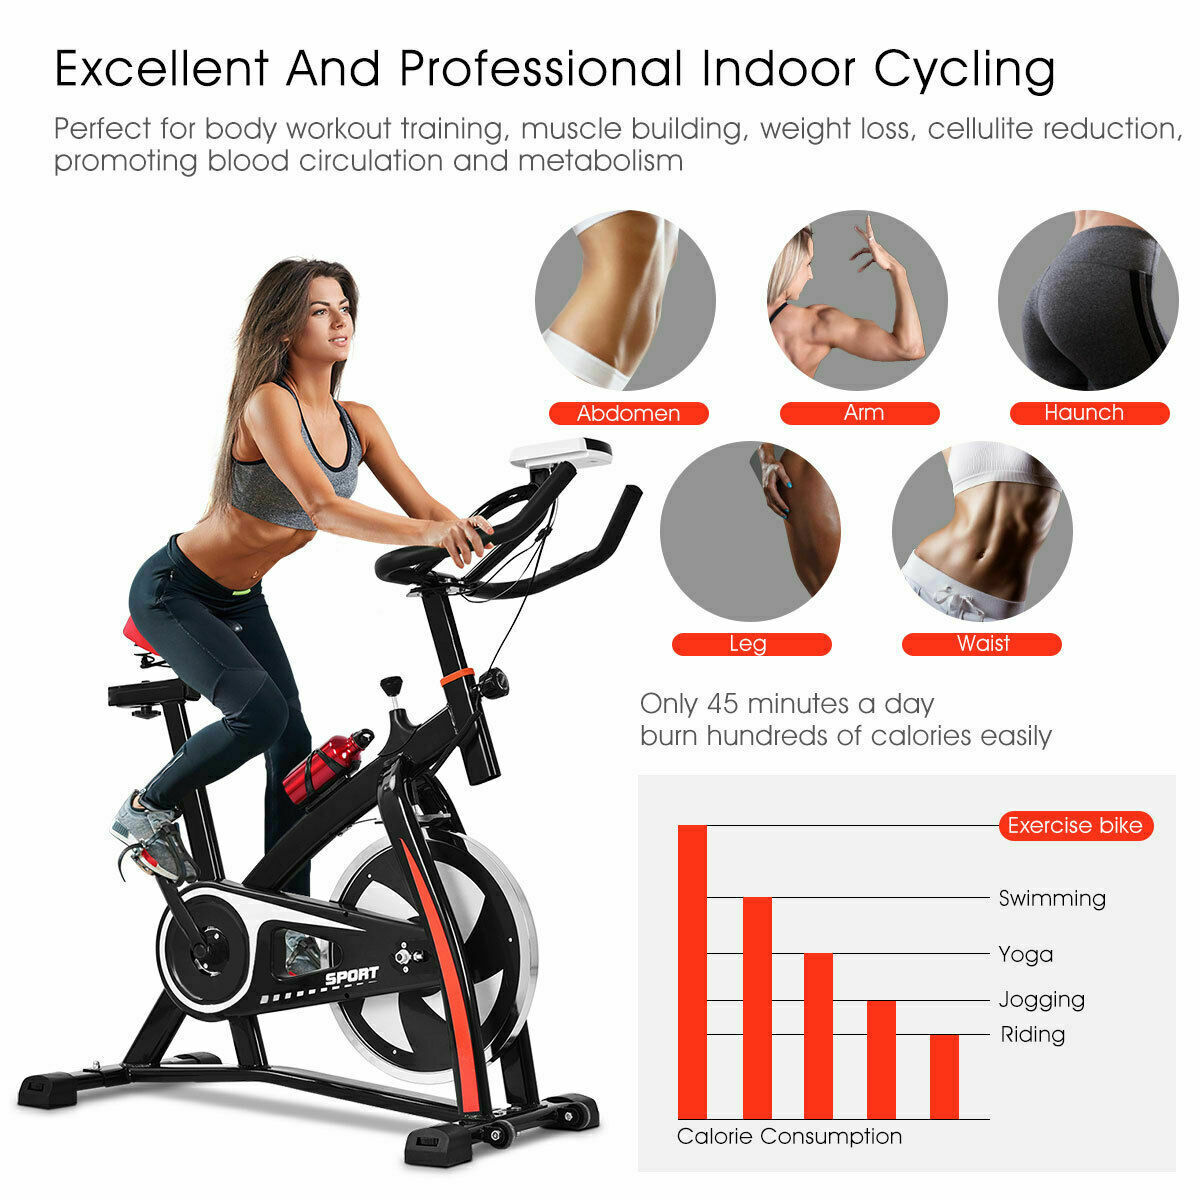 Costway Exercise Bicycle Indoor Bike Cycling Cardio Adjustable Gym Workout Fitness Home - image 3 of 9